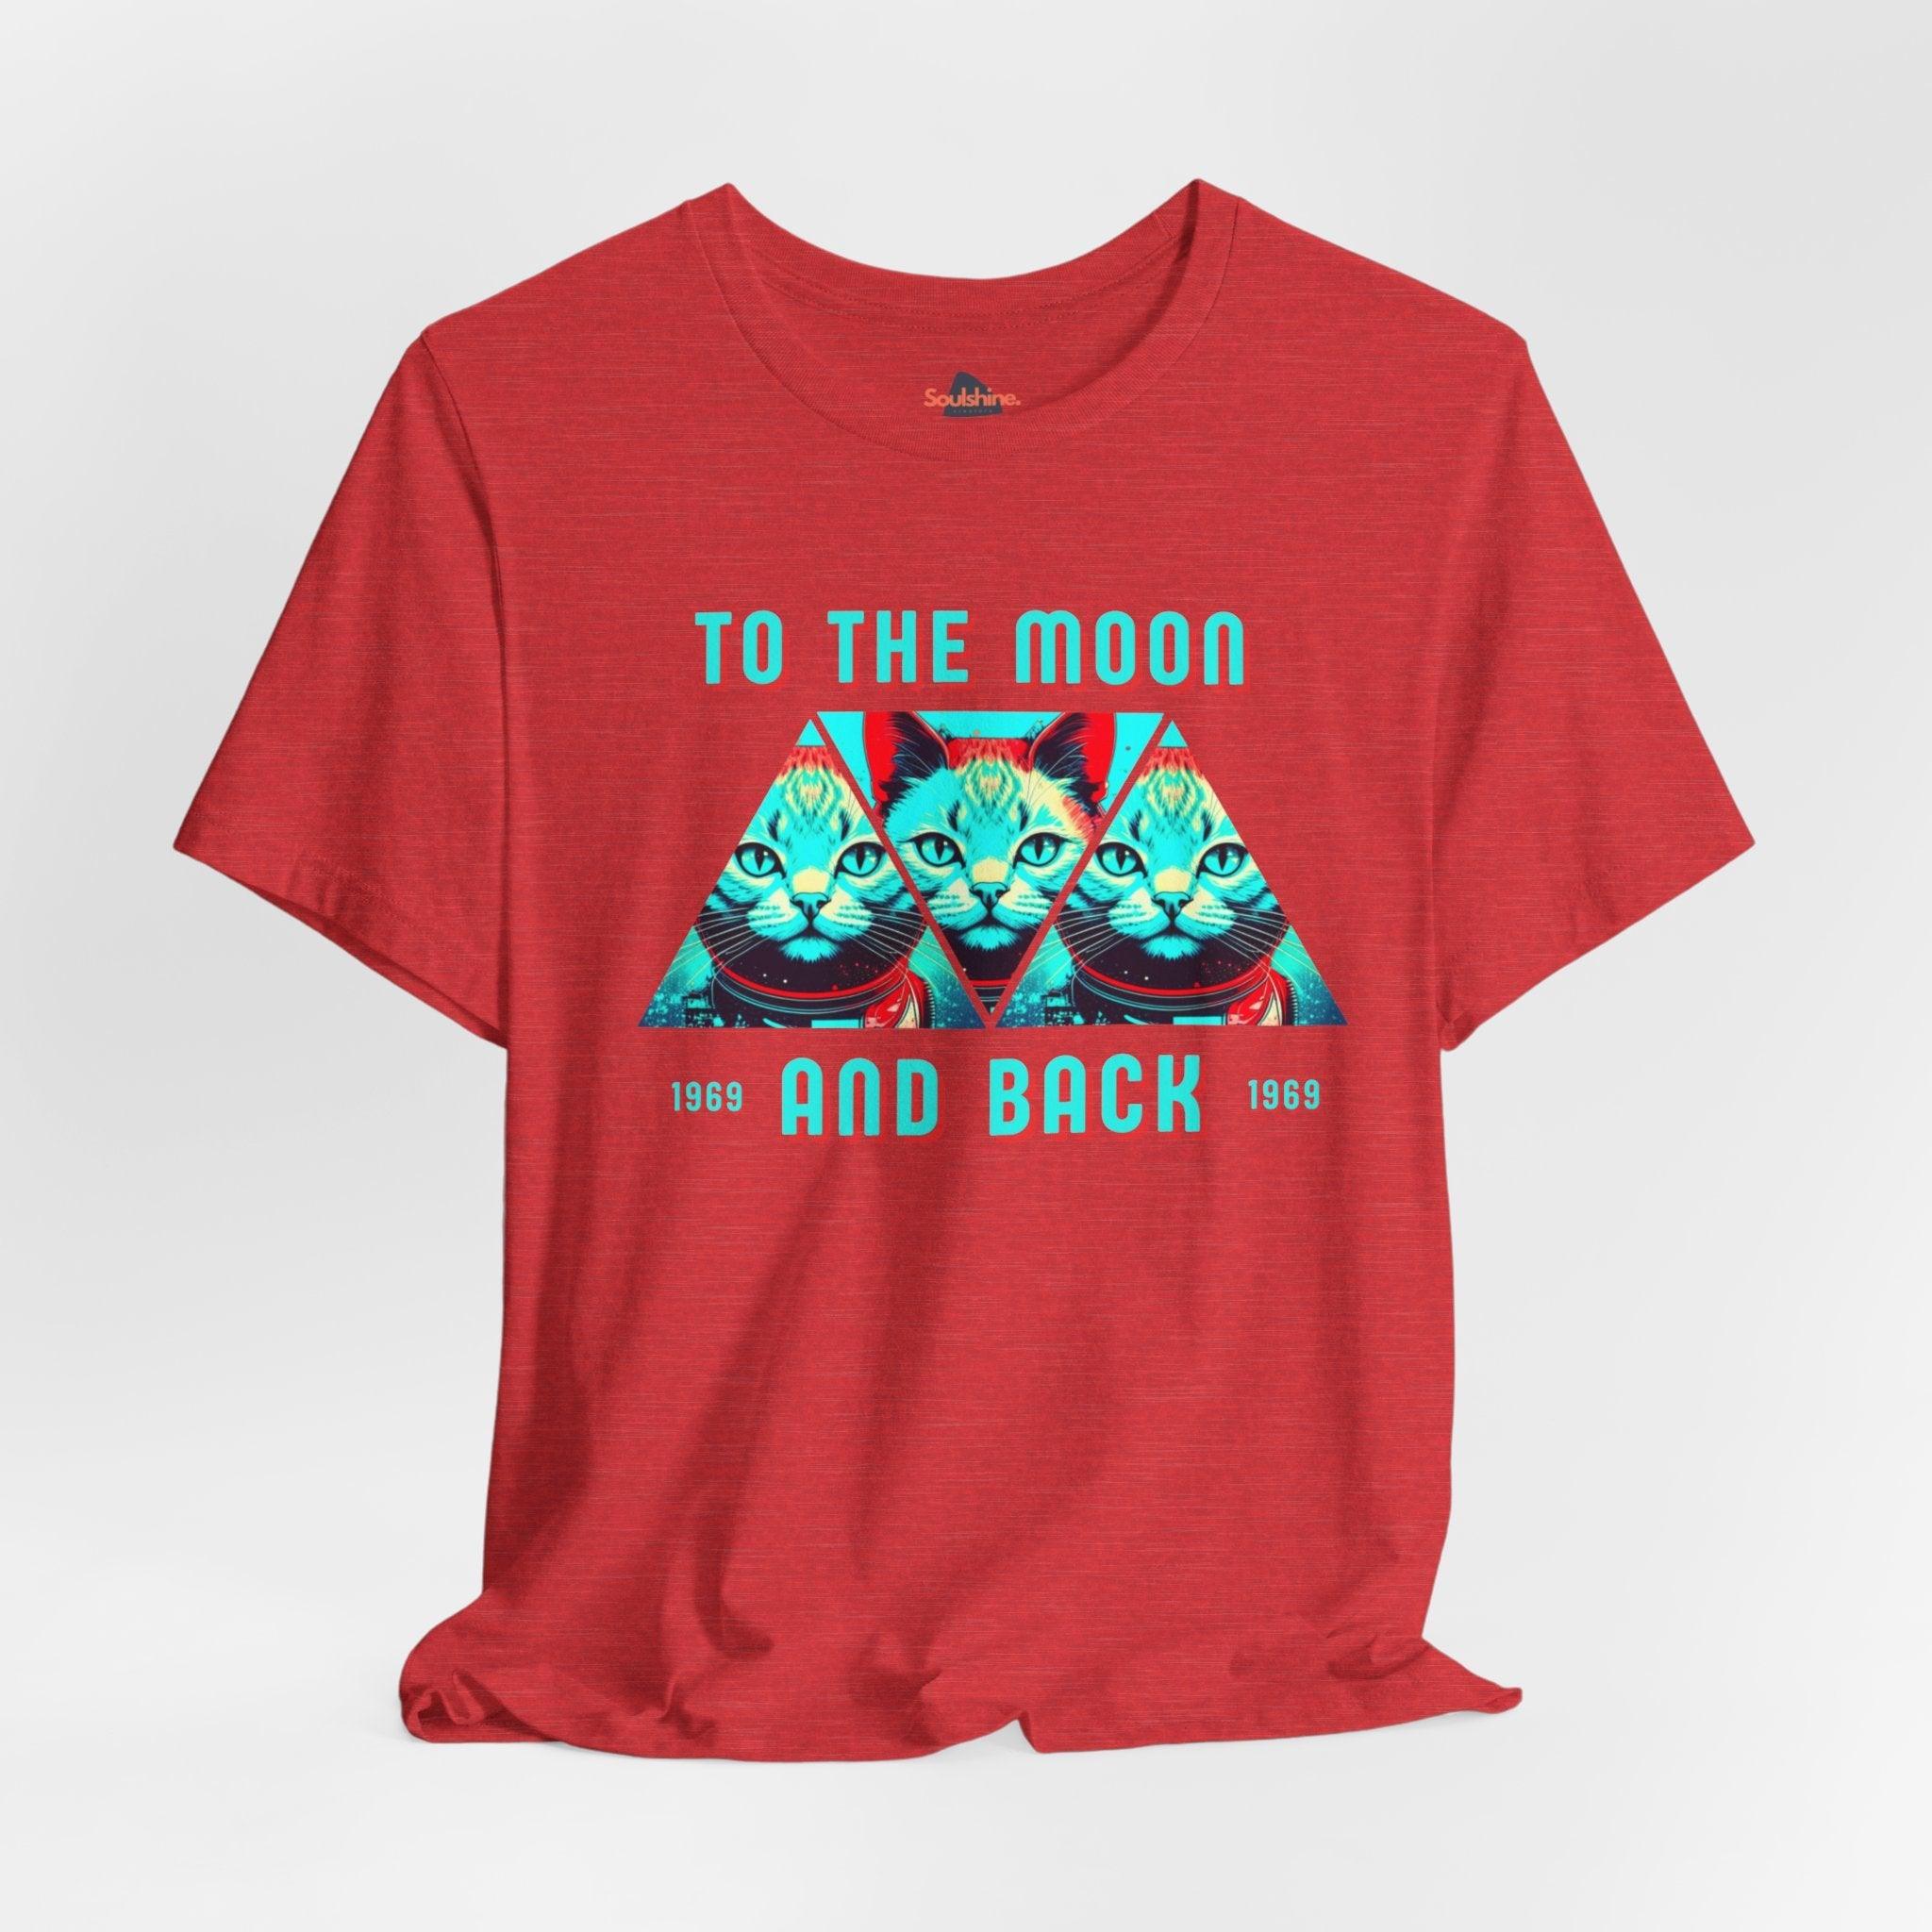 To the moon and back - Soulshinecreators - Unisex Jersey Short Sleeve Tee - US Heather Red S T-Shirt by Soulshinecreators | Soulshinecreators